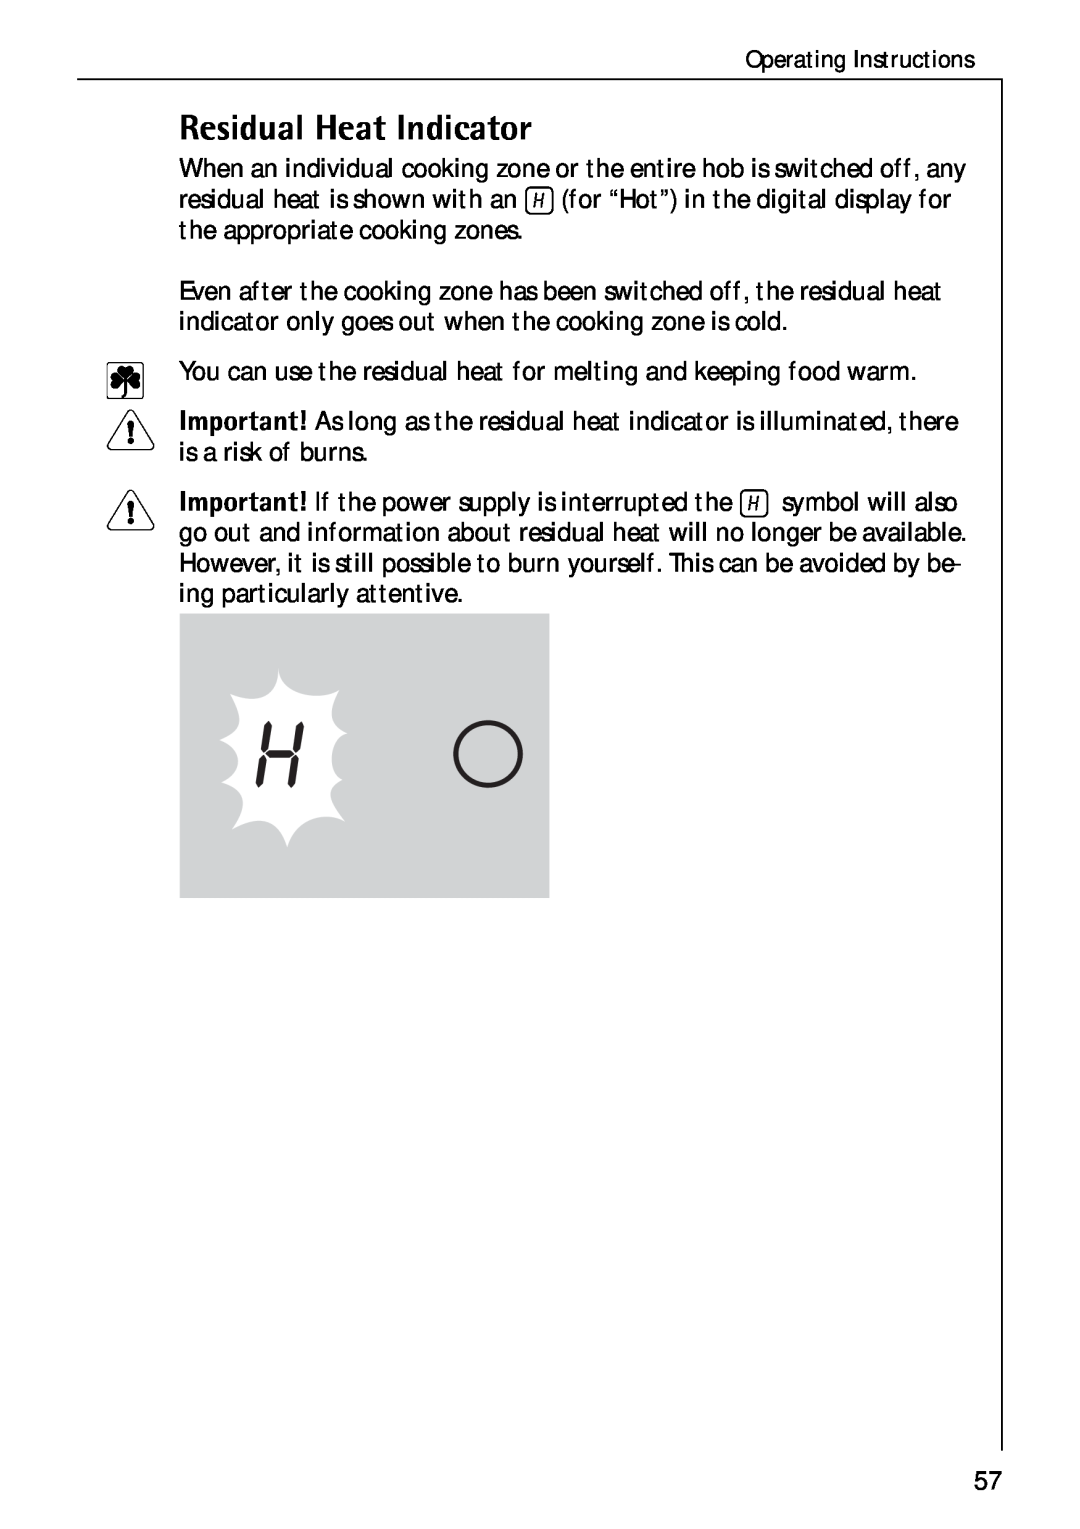 Electrolux C75301K operating instructions Residual Heat Indicator, the appropriate cooking zones, is a risk of burns 